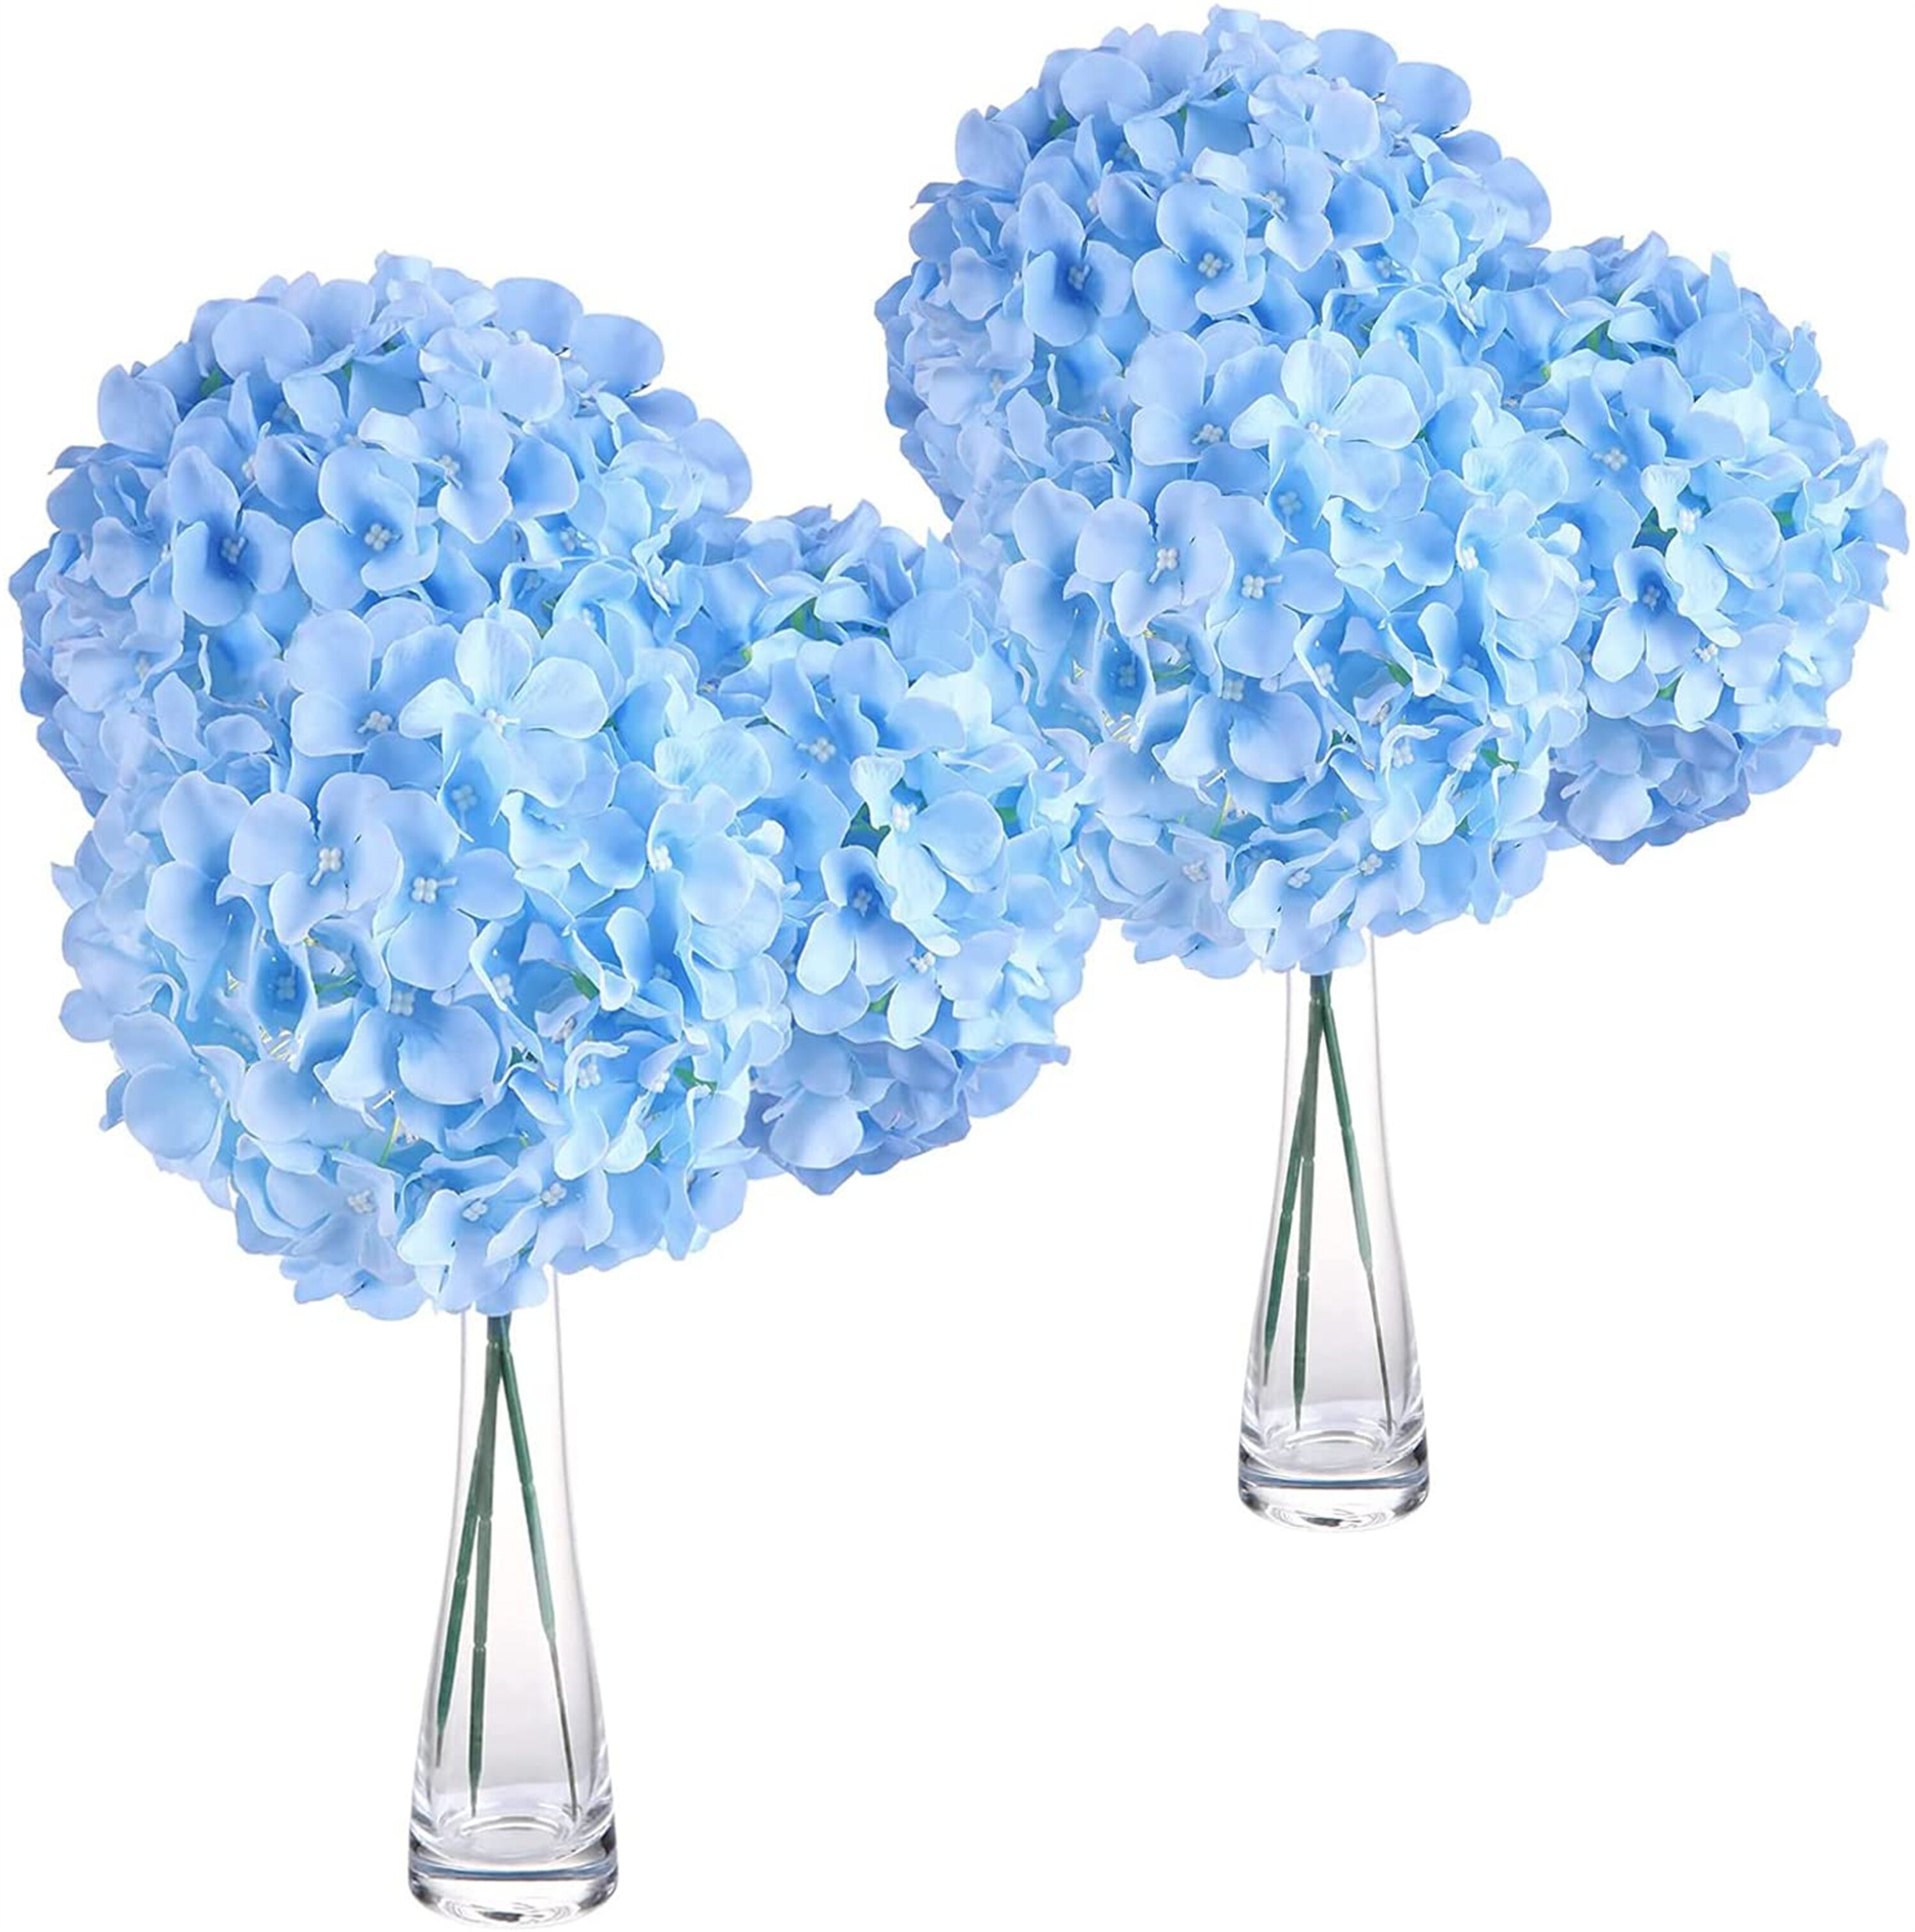 Pack of 50 Artificial Silk Hydrangea Flower Heads for Flower Wall Decorations